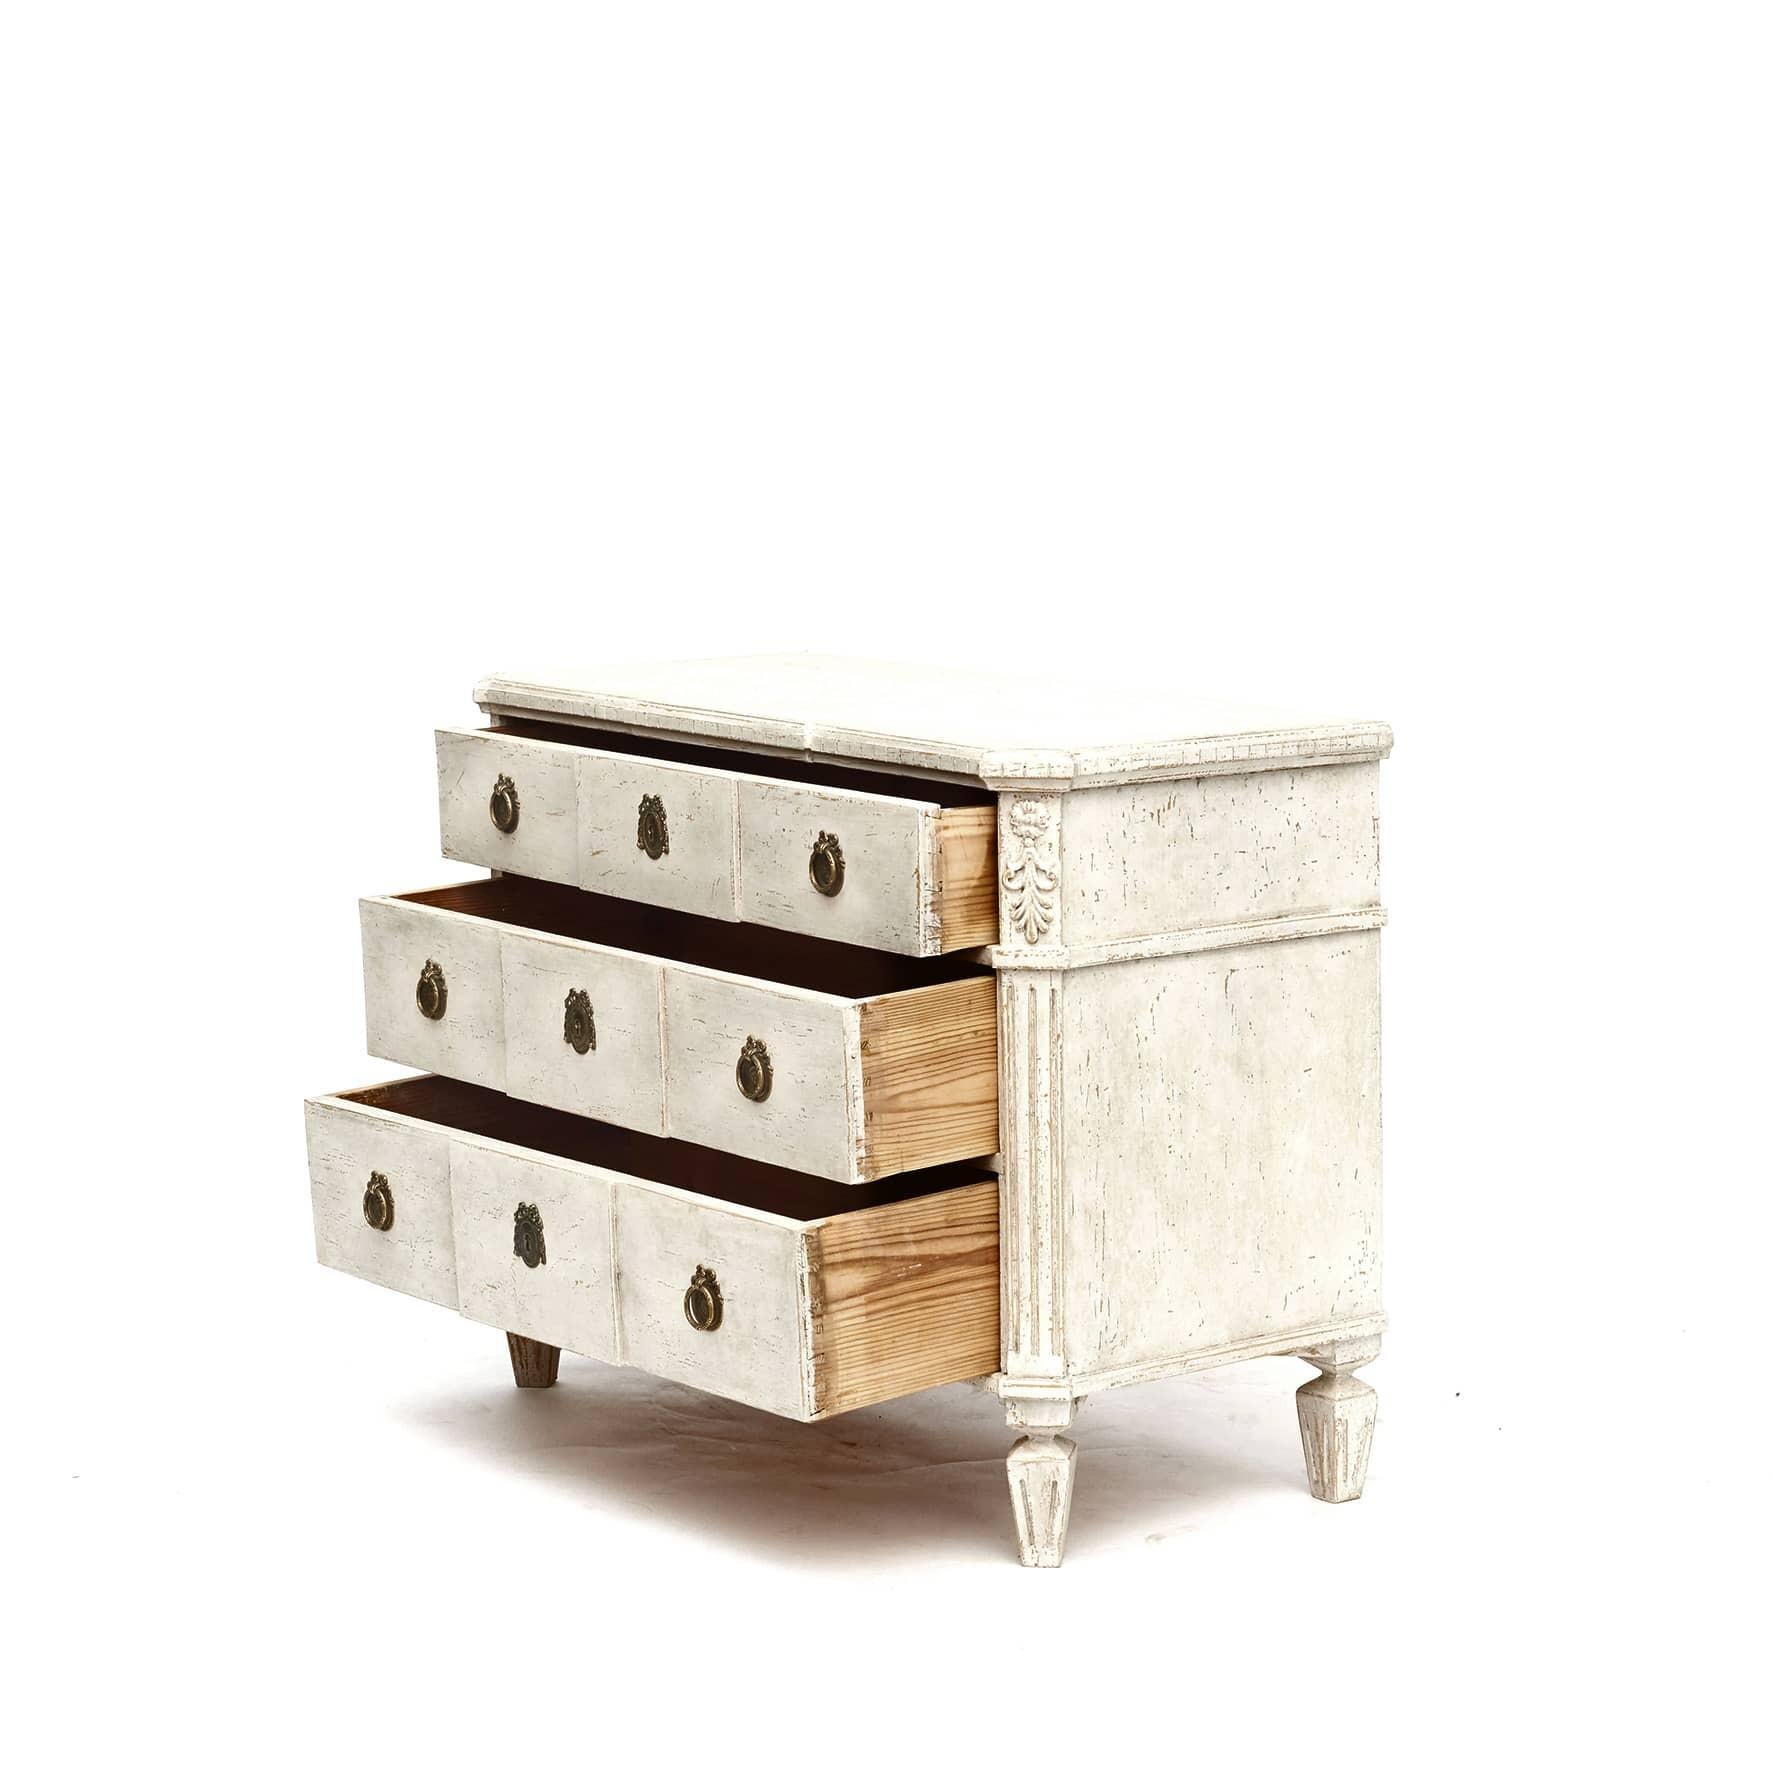 Pair of chests of drawers Gustavian style.
Top plate with edge profile strip under tooth cut.
Light gray painted chests features 3 breakfront drawers flanked by canted sides.
Rectangular top with canted corners in the front, sitting above a carved